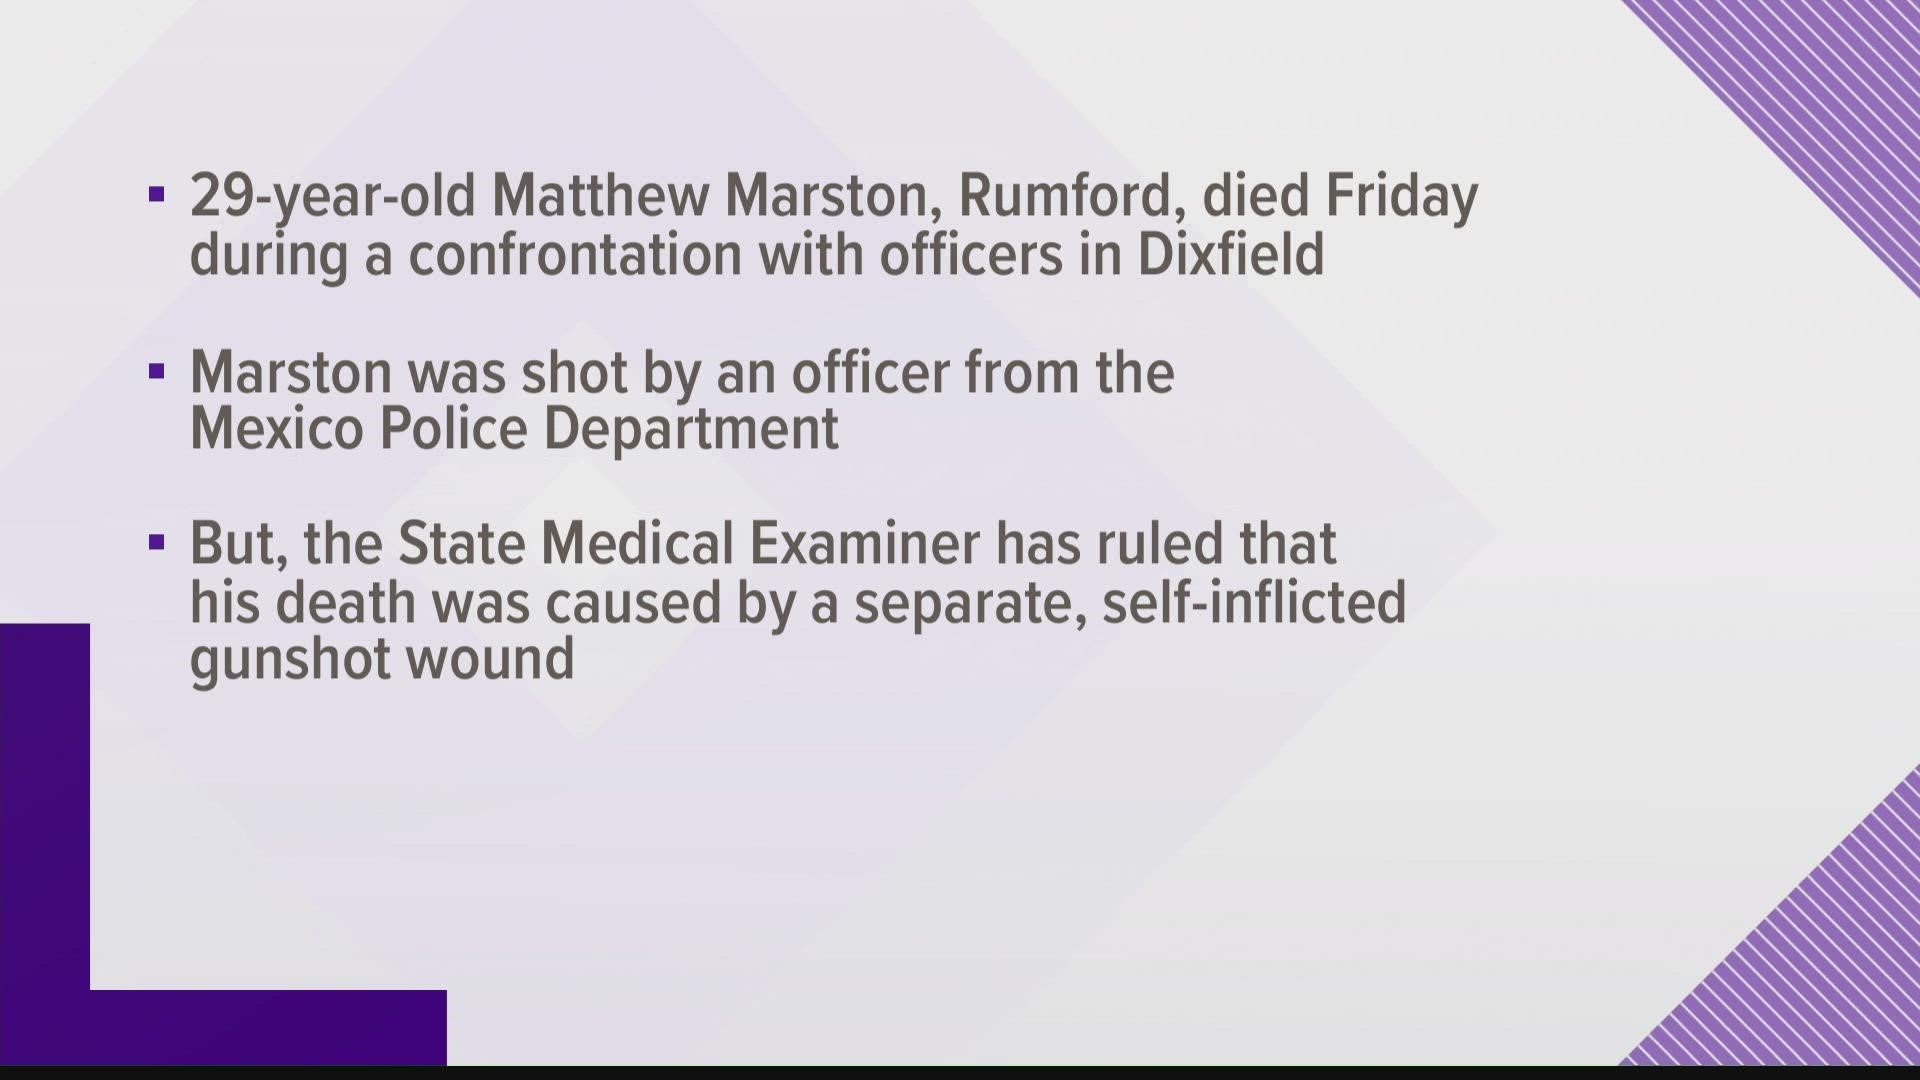 Matthew Marston was shot by an officer on Friday night, but the State Medical Examiner determined his death was related to a separate self-inflicted gunshot wound.